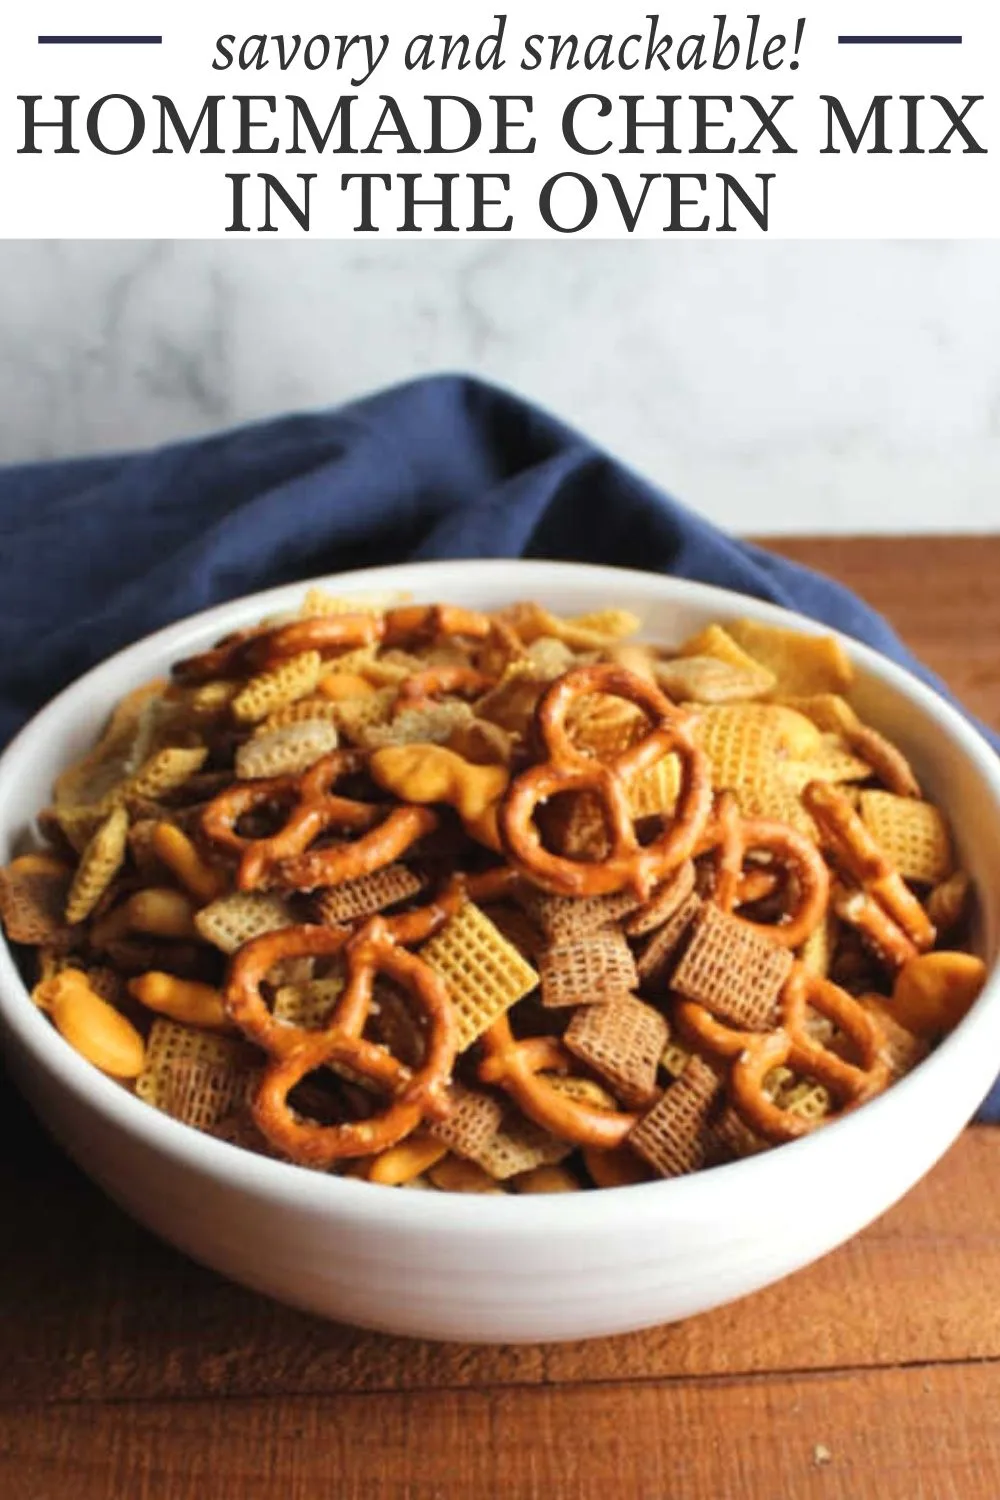 This classic Chex mix is perfect. Each pieces is coated with savory seasoned goodness and it is baked to crisp perfection. There are no little packets of mix to remember, just simple ingredients you are likely to already have in your pantry. It is good for holiday gatherings, parties, road trip snacks and more.